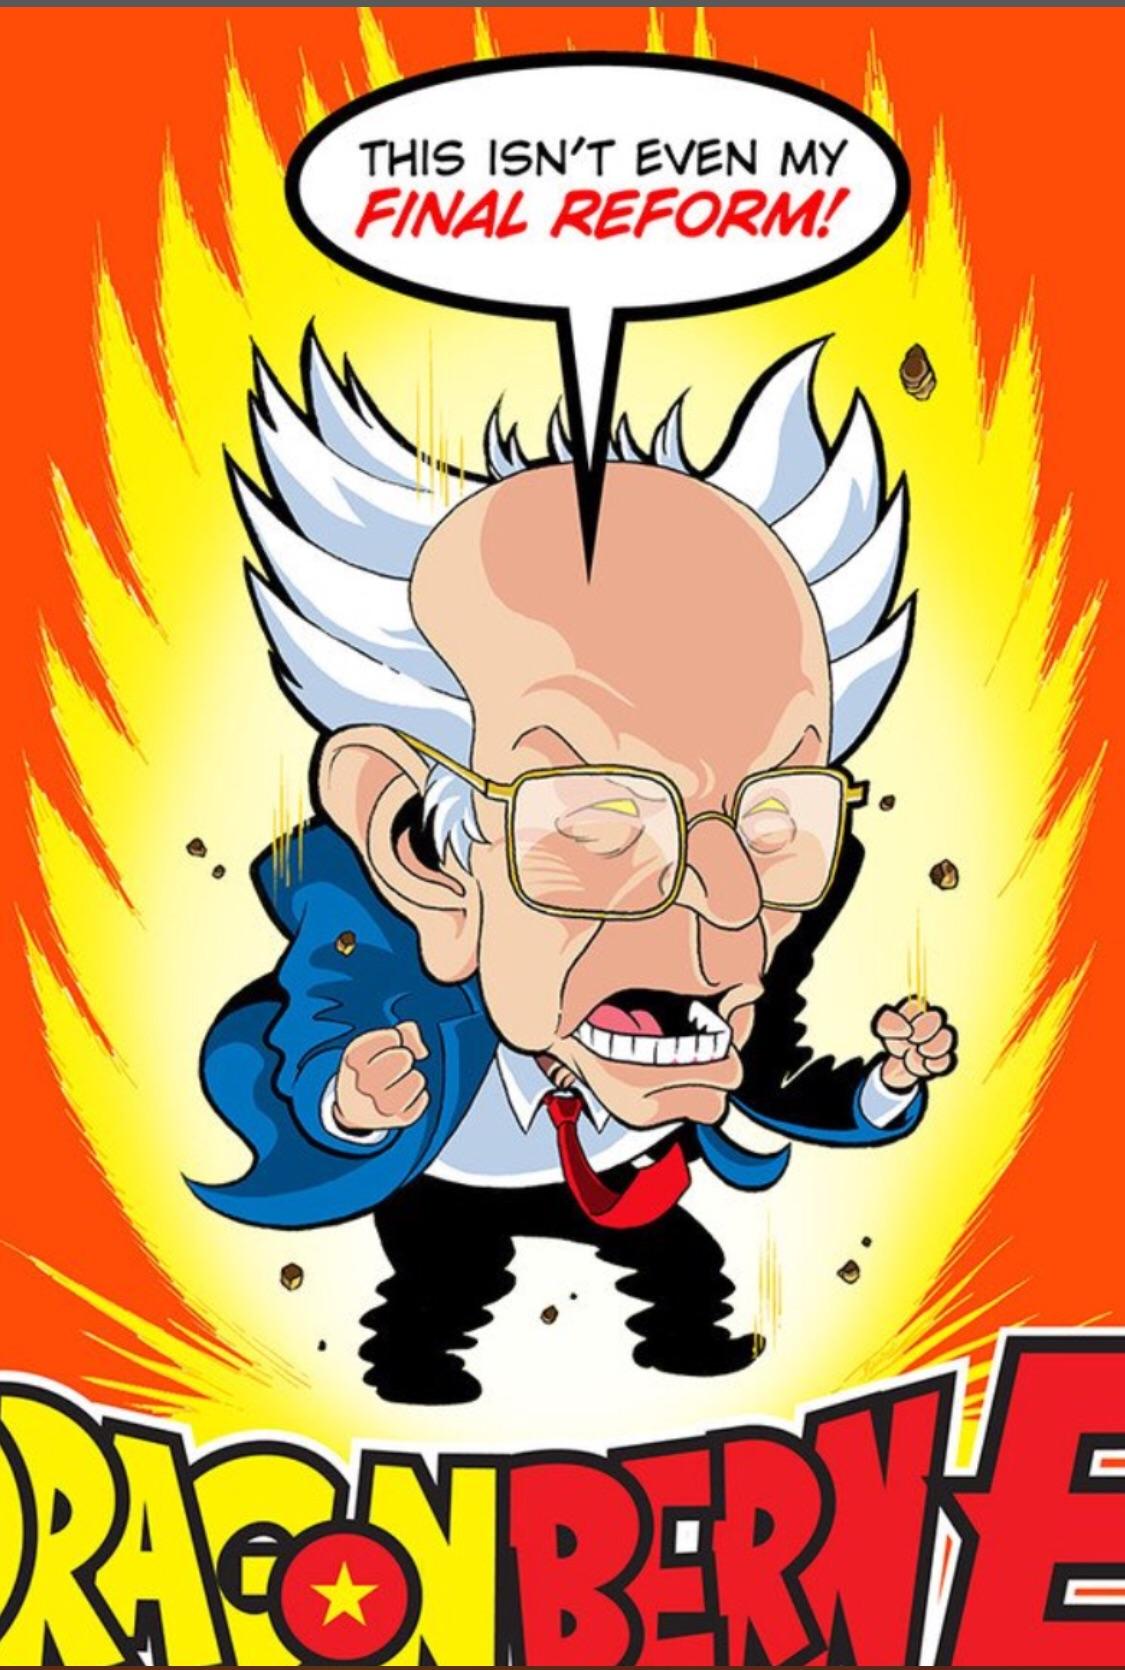 My 11 Year Old Son Is Hyped For Bernie And Added This - Isn T Even My Final Form Goy , HD Wallpaper & Backgrounds